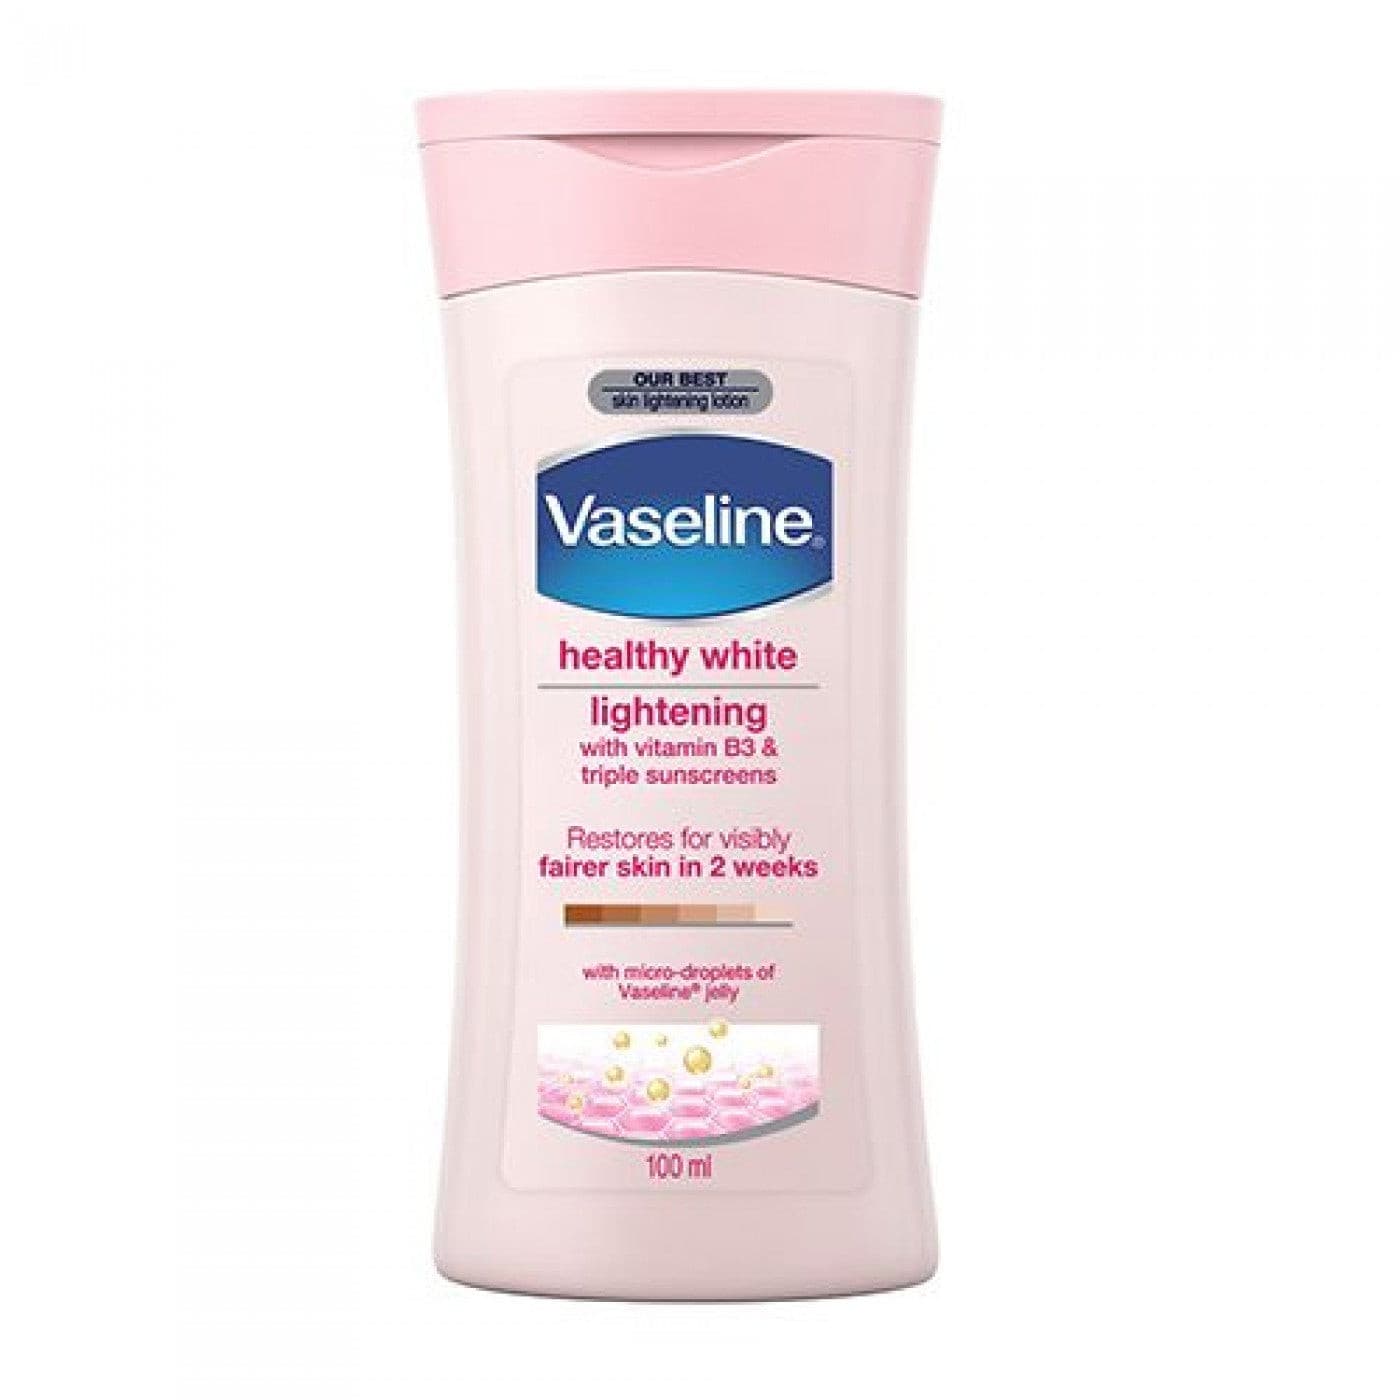 Vaseline Daily Brightening Even Tone Lotion.